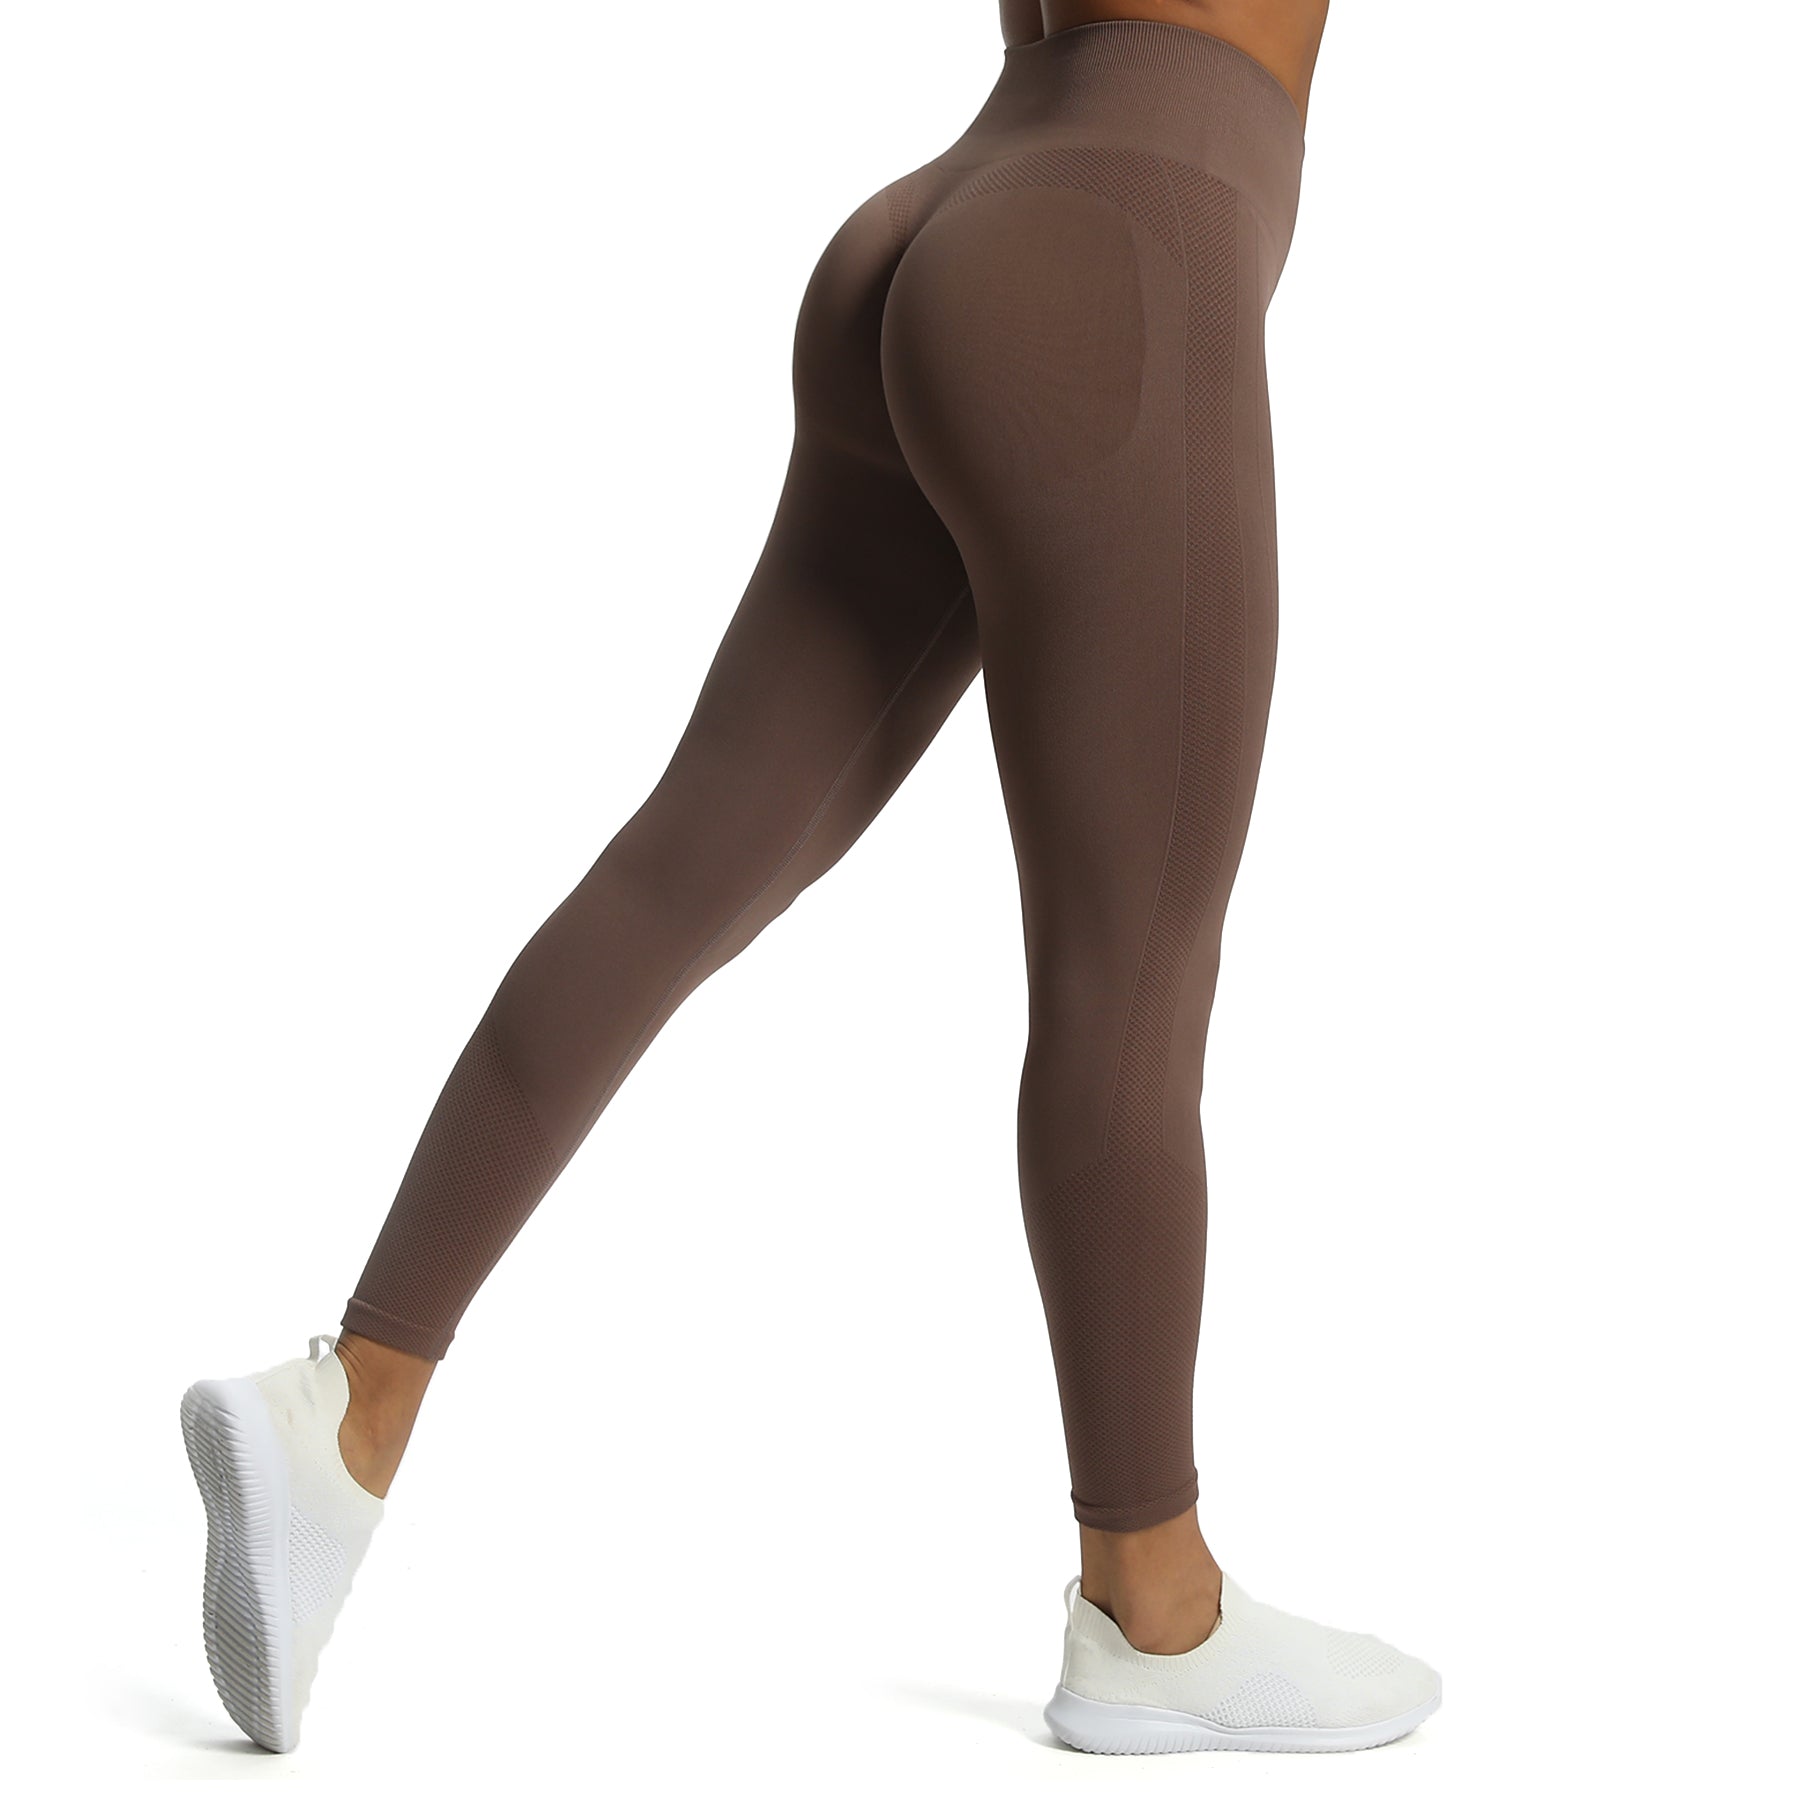 Aoxjox Scrunch Seamless Leggings for Women High Waisted Tummy Control 2.0  Smile Contour Workout Leggings Yoga Pants, A Mocha Marl, Large